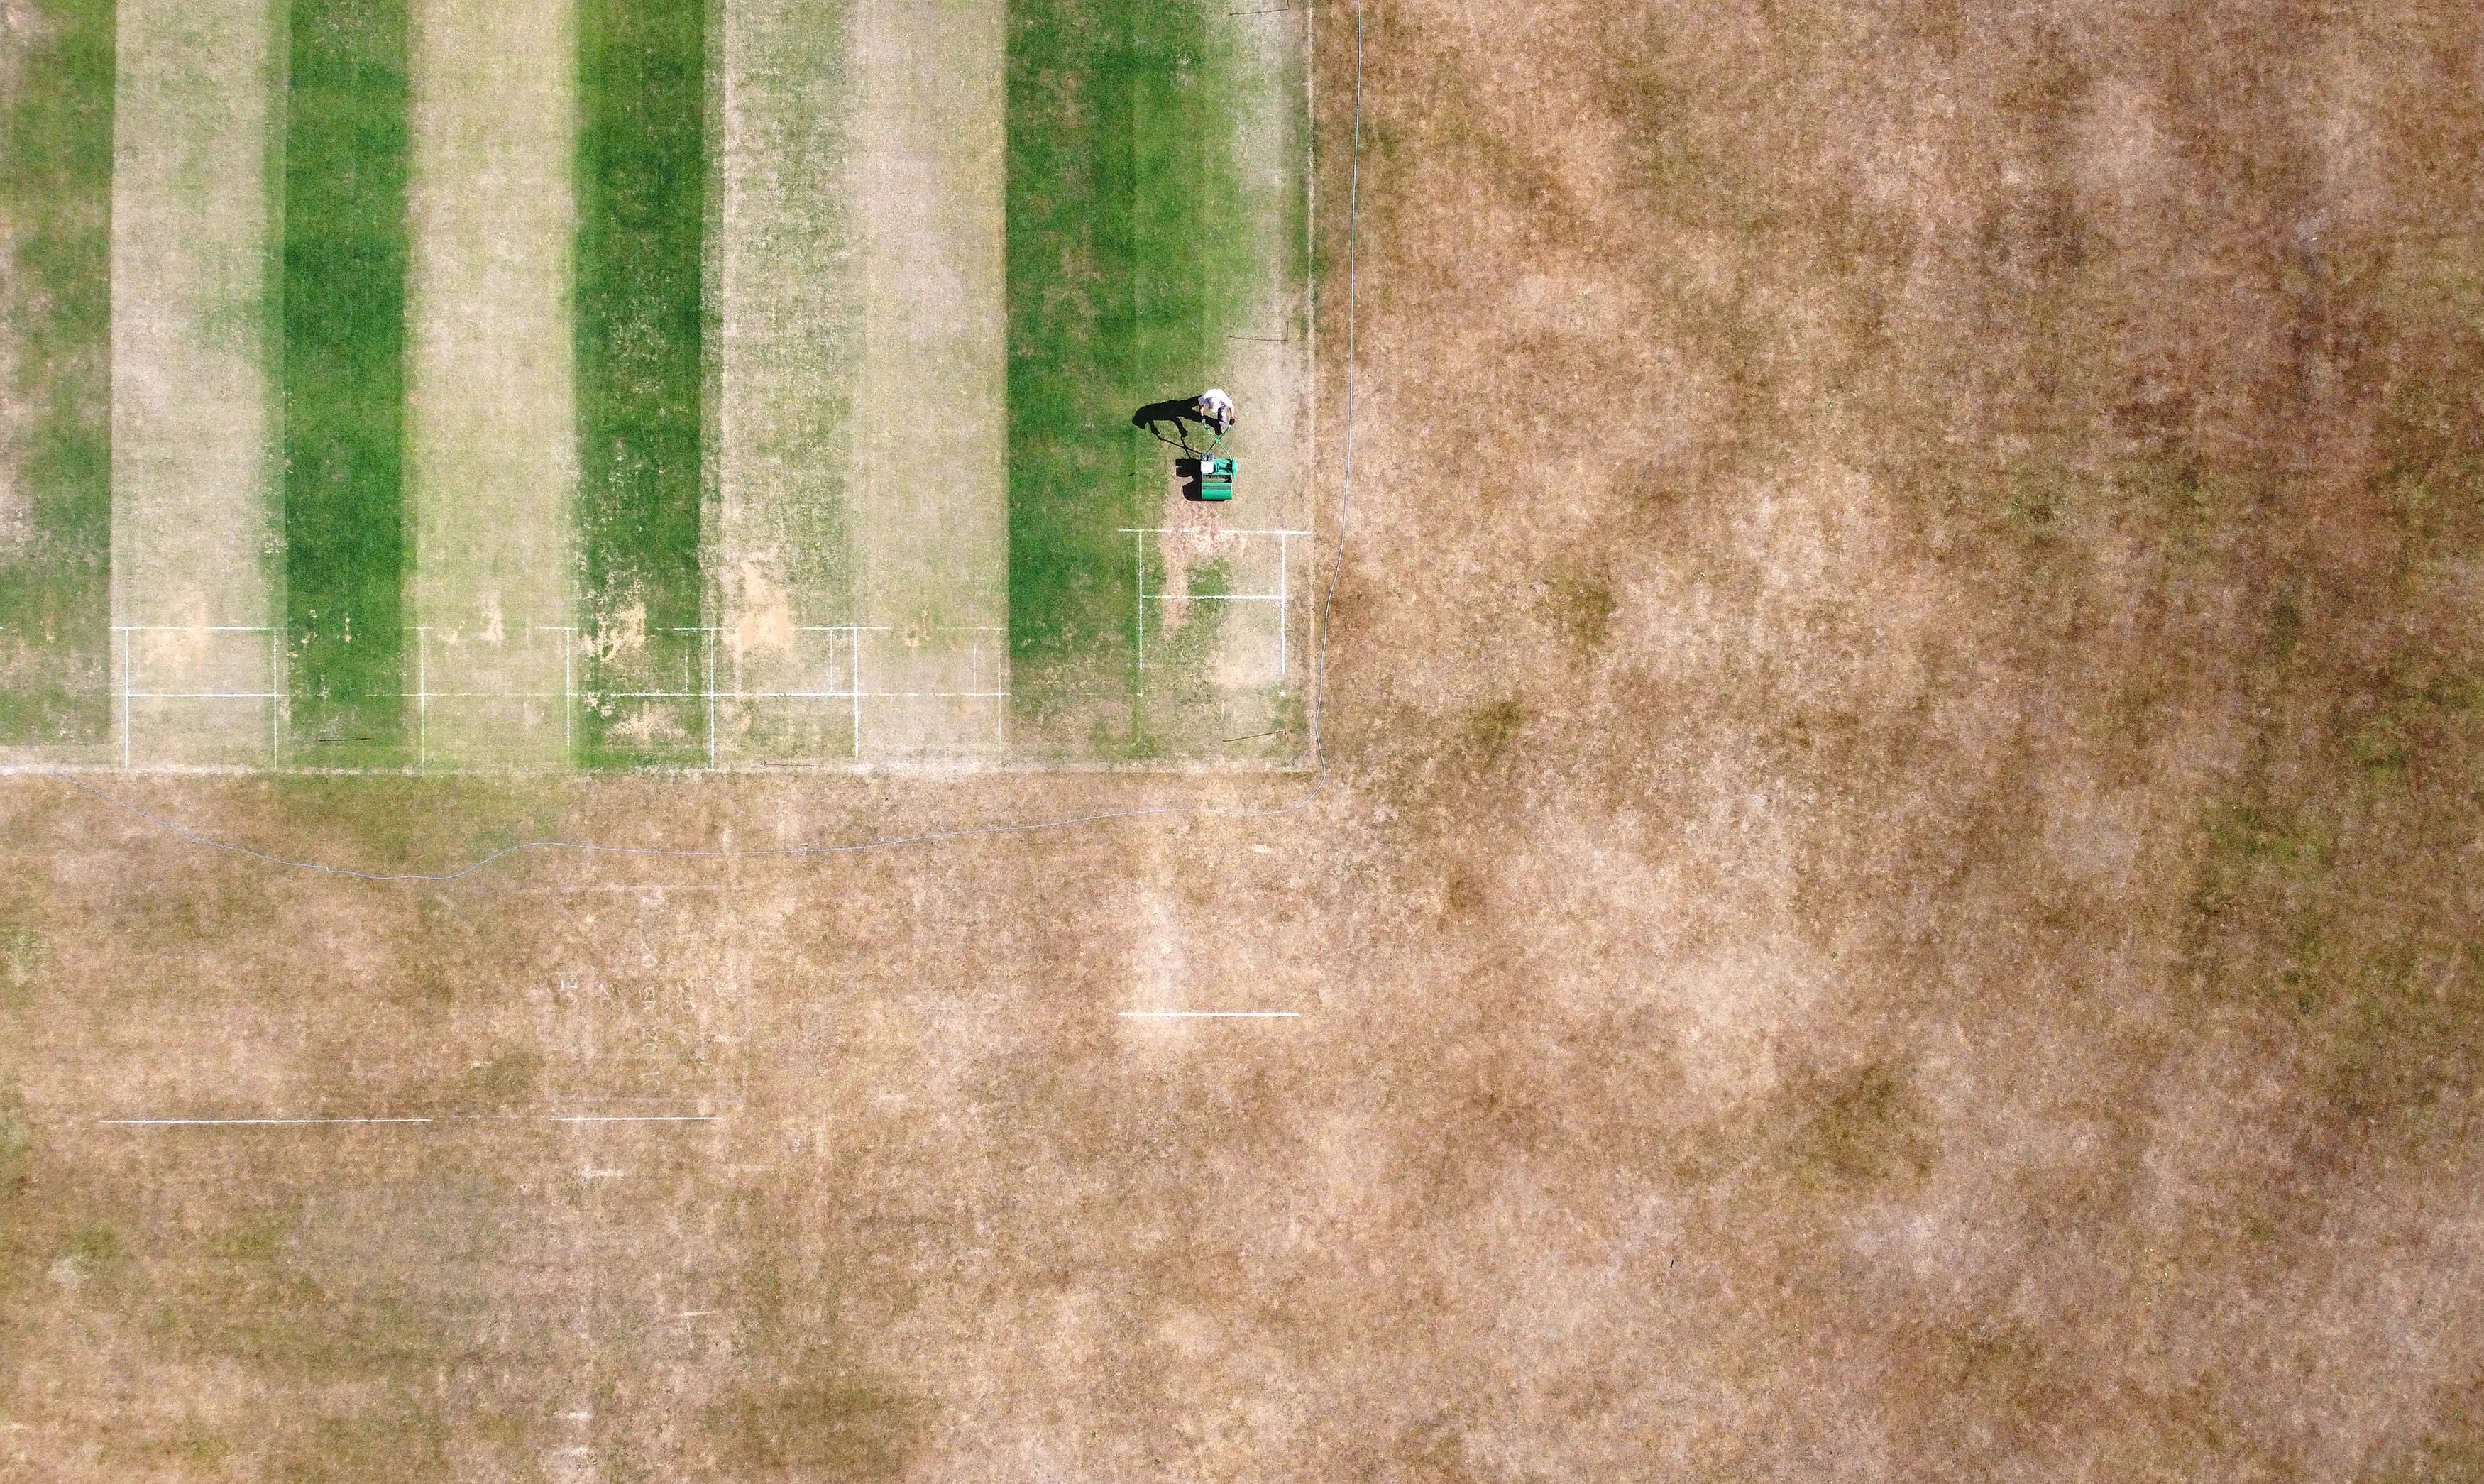 A groundsman at Boughton and Eastwell Cricket Club in Ashford, Kent, prepares the wickets for matches this weekend